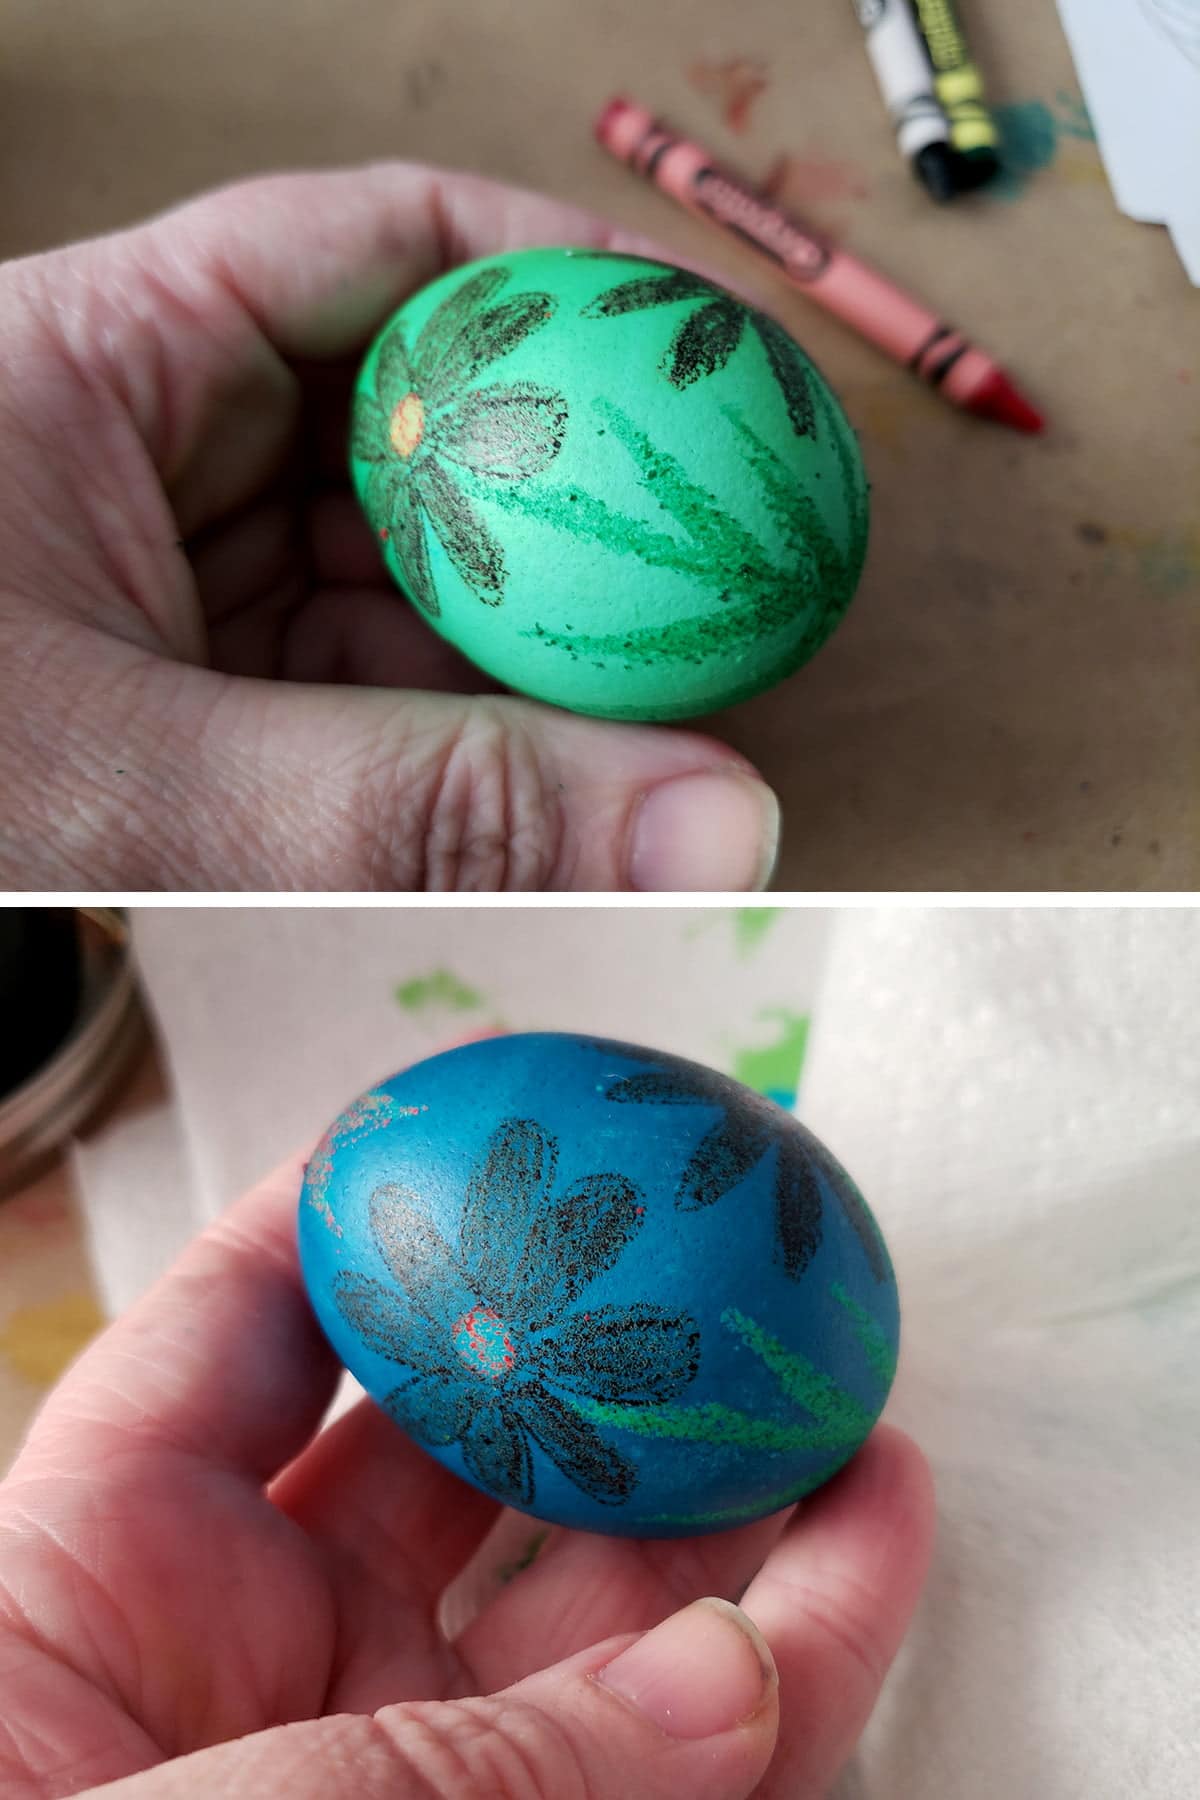 A two part image shows a green egg with black daisies on it, and a hand holding a now-blue easter egg with black daisies on it.